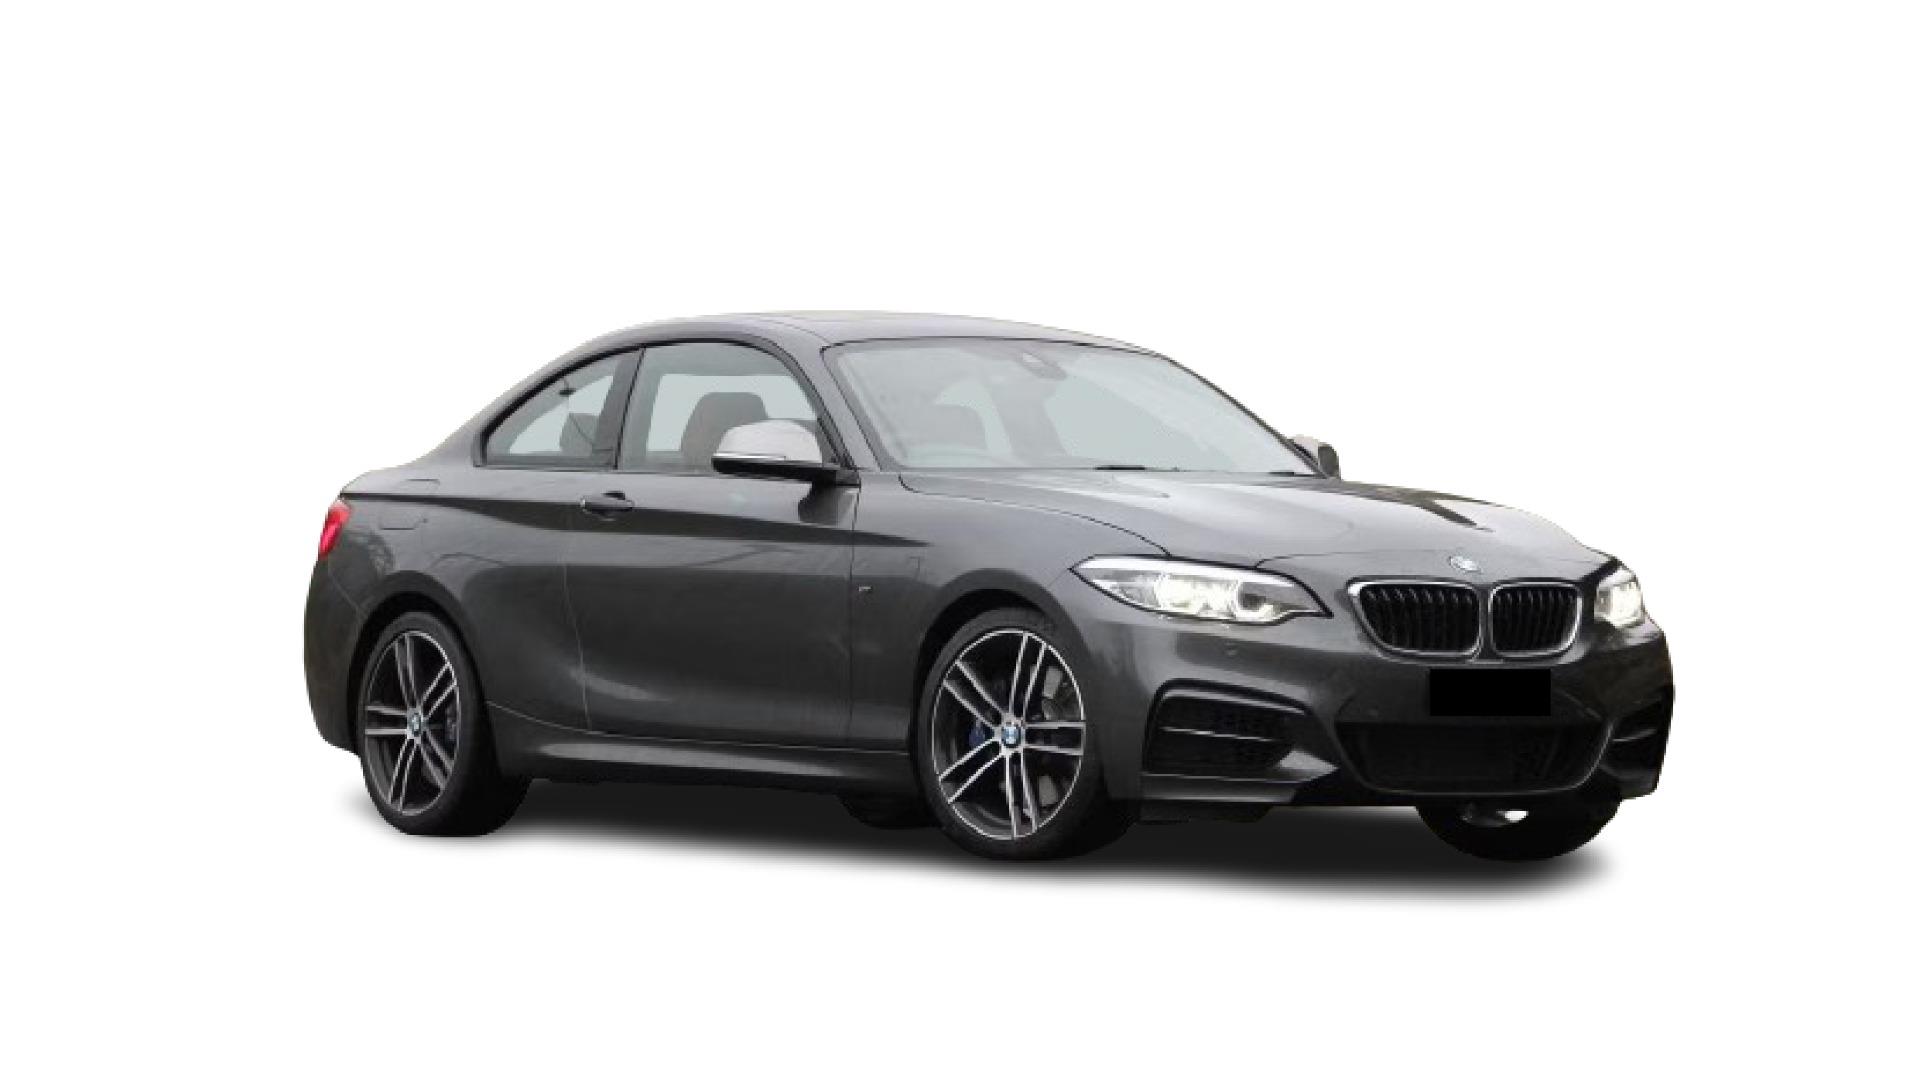 2019 BMW 2 Series Coupe Facelift M240i M Sport Sport Steptronic for sale - 343321